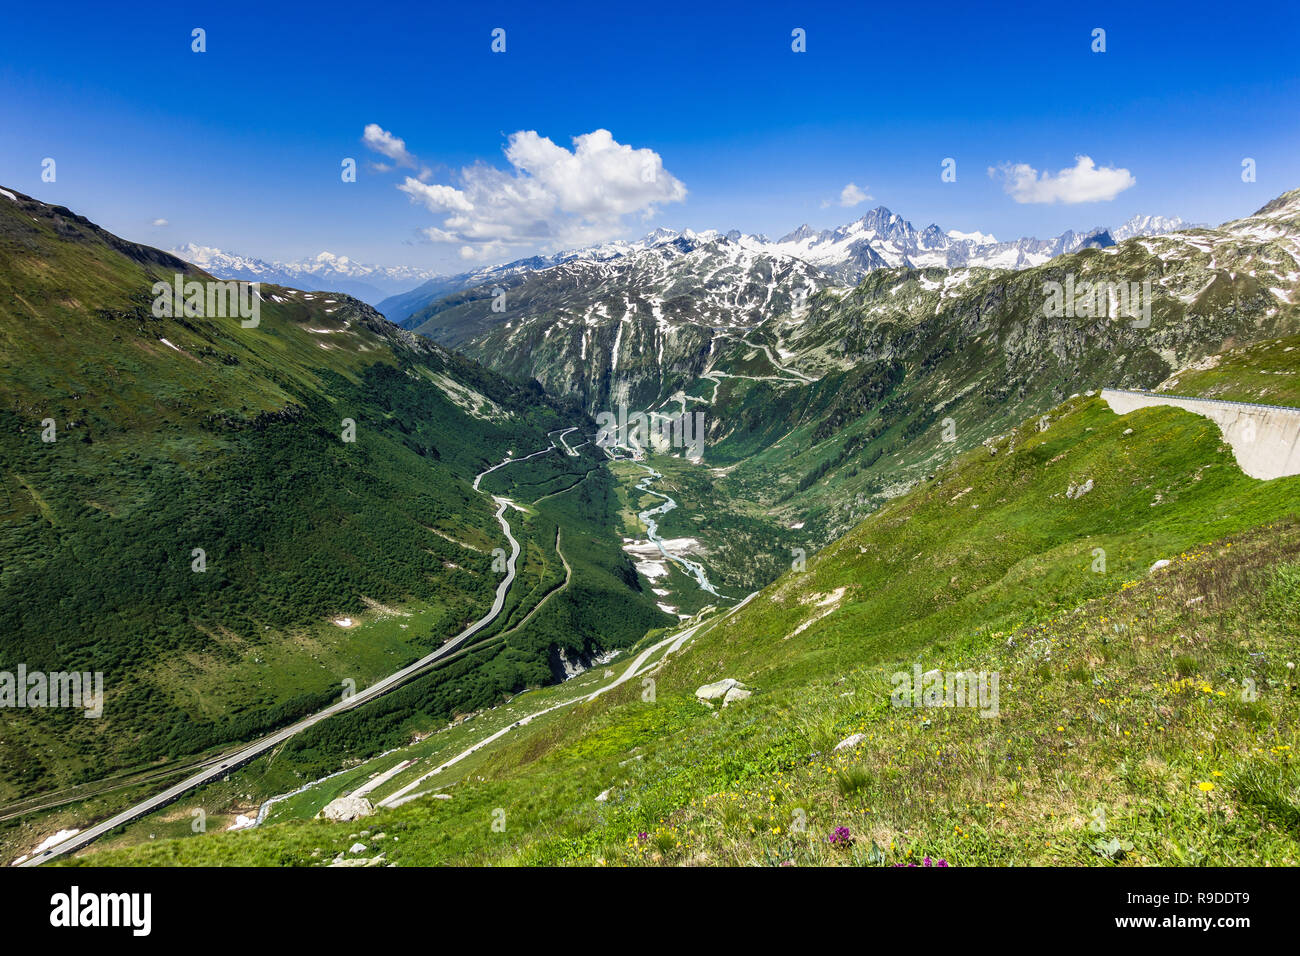 Rhone Valley at canton Valais with the to road to Furka pass on the left an the road to Grimsel pass on the background, Switzerland Stock Photo